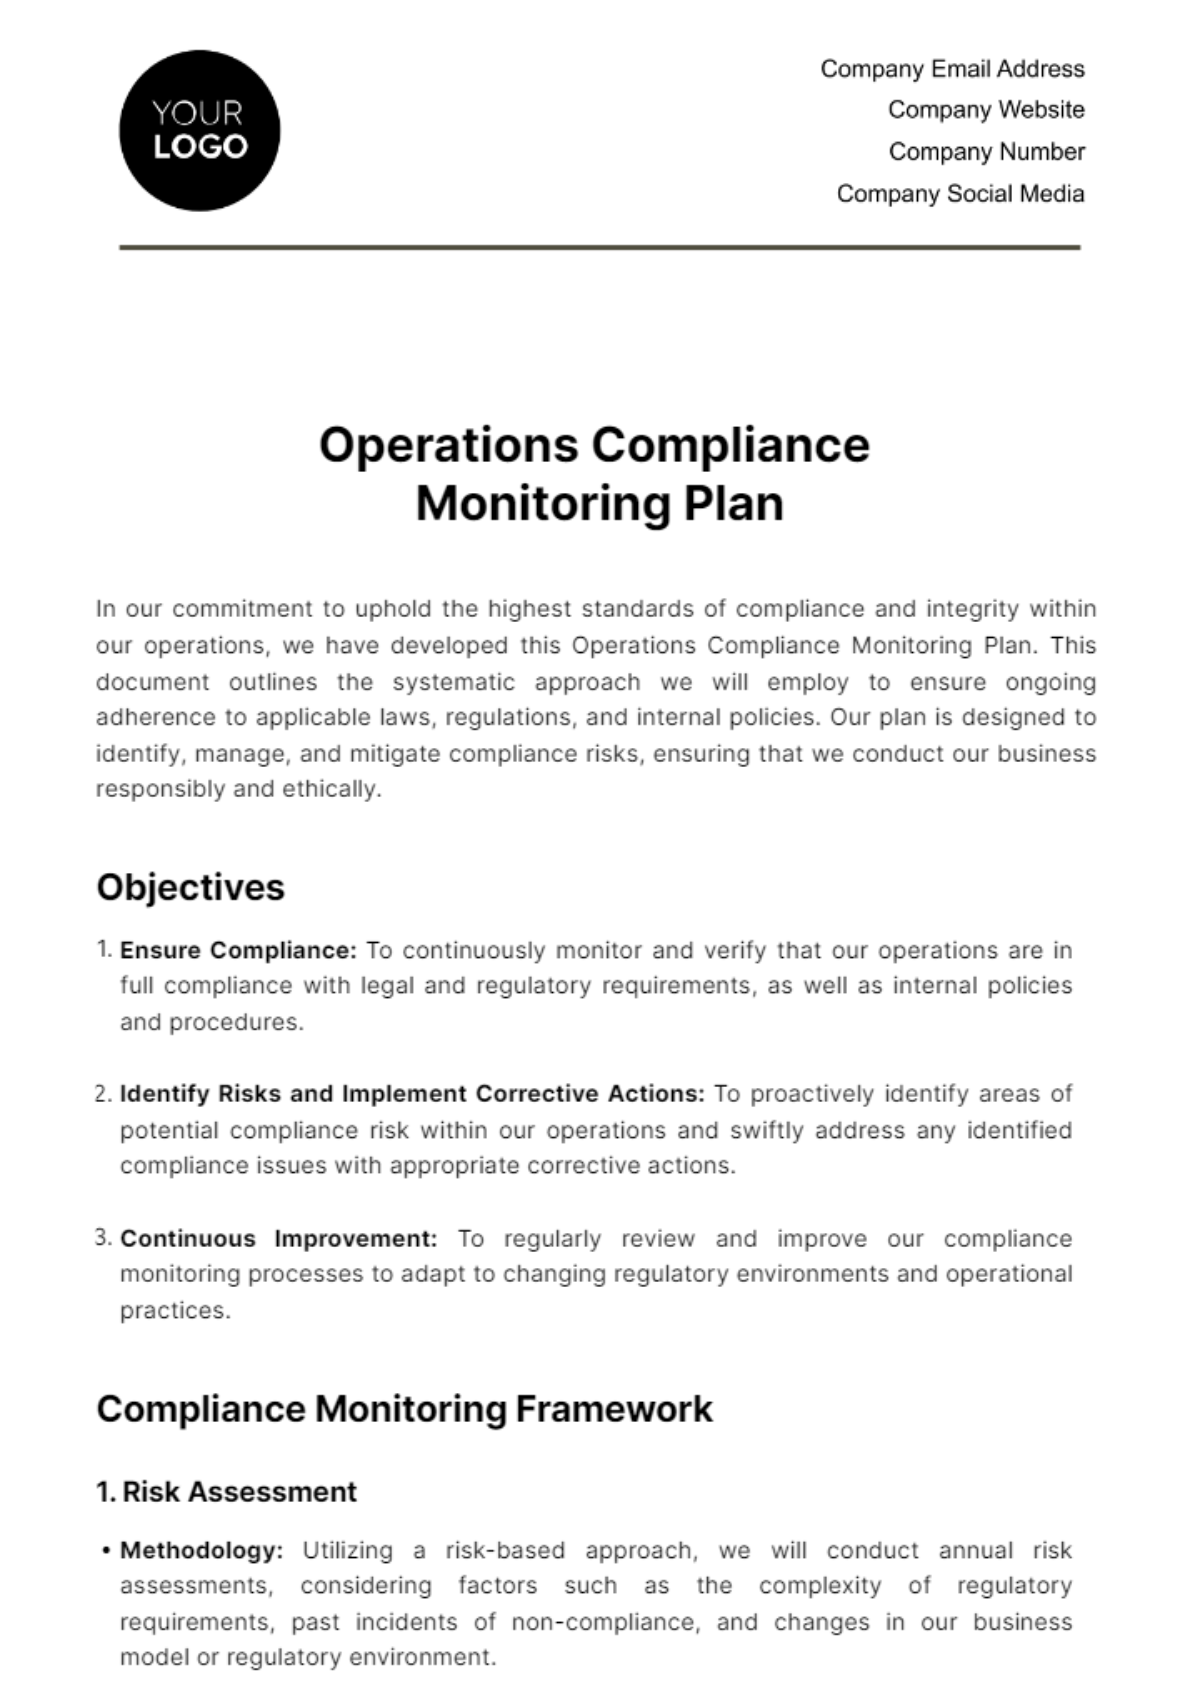 Free Operations Compliance Monitoring Plan Template